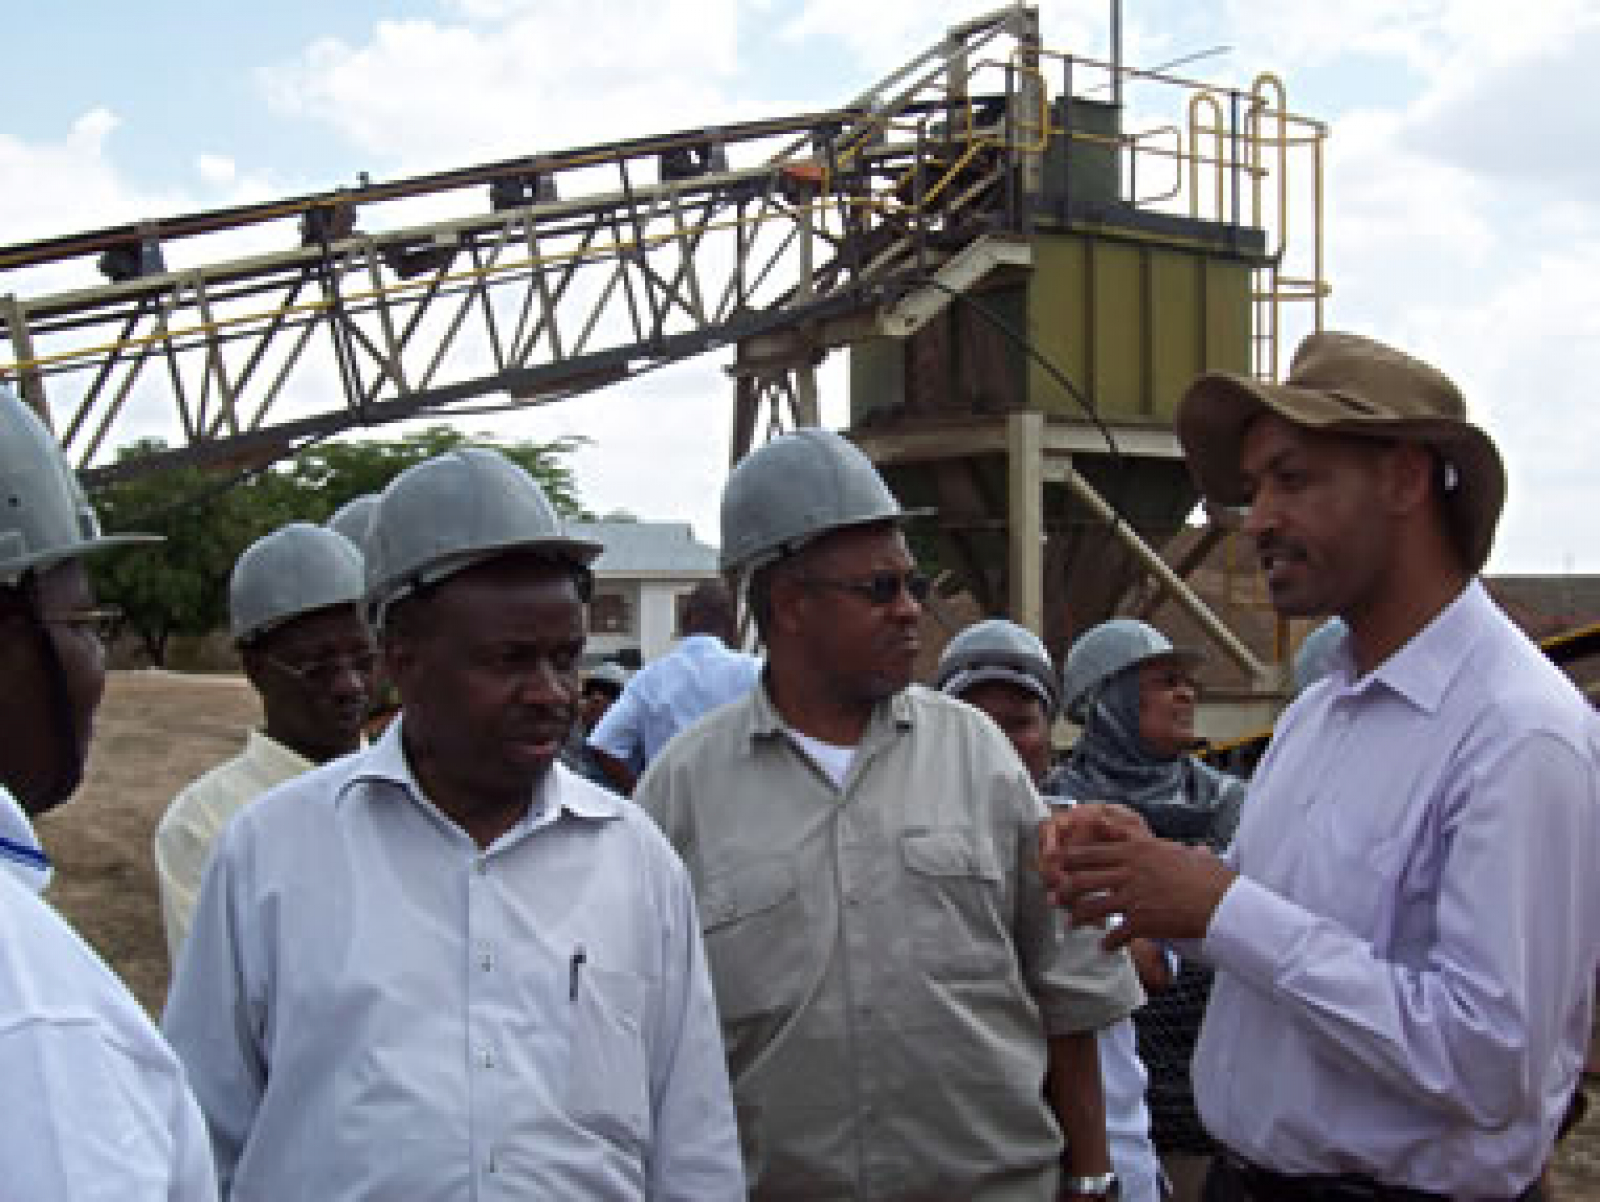 NDI Supports East African MPs’ Efforts to Improve Mining Sector Oversight